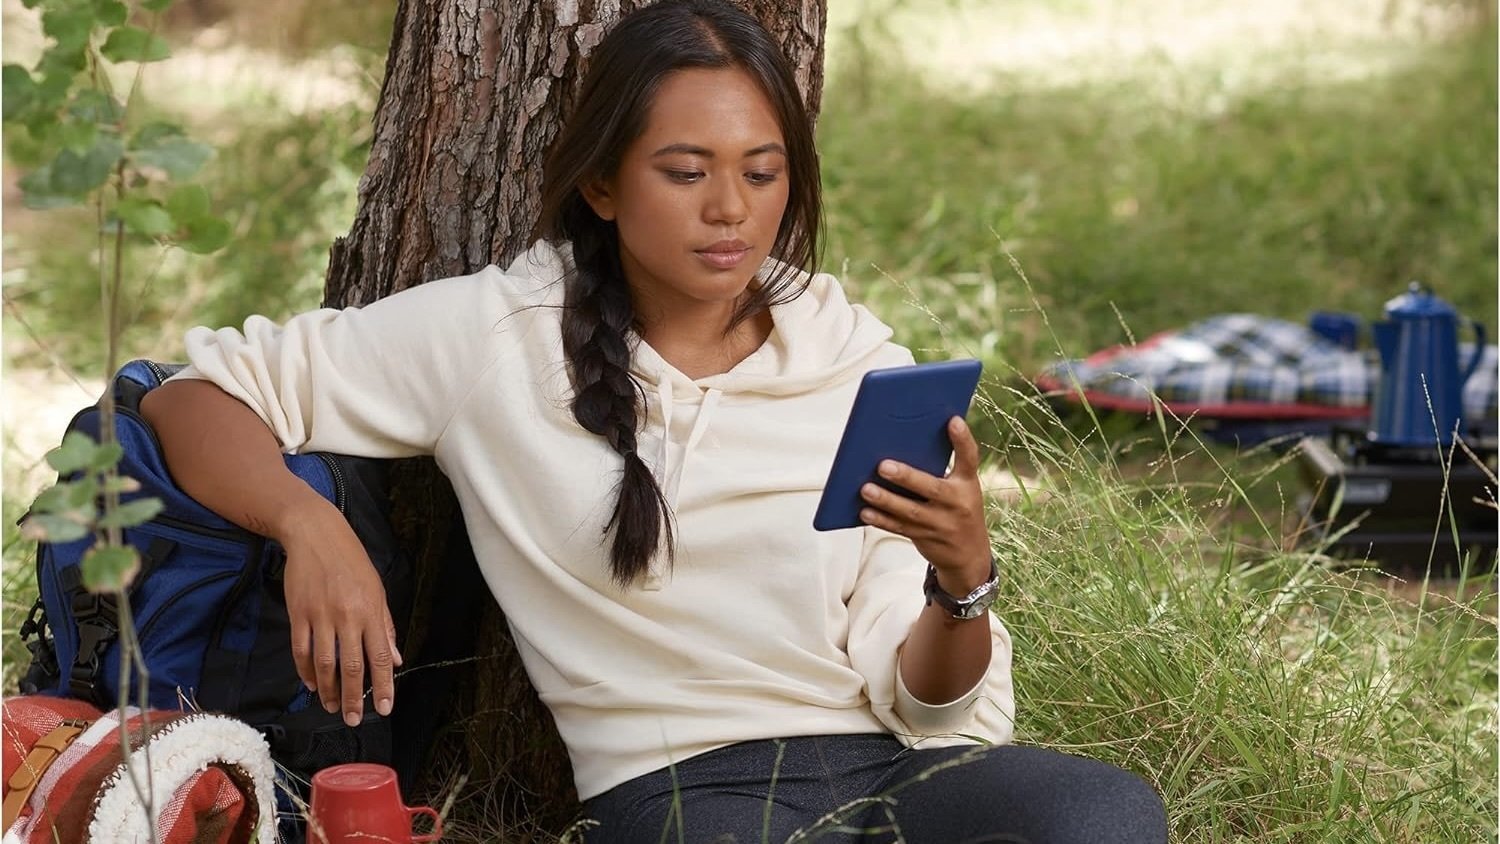 person reads on kindle sitting against trees outdoors